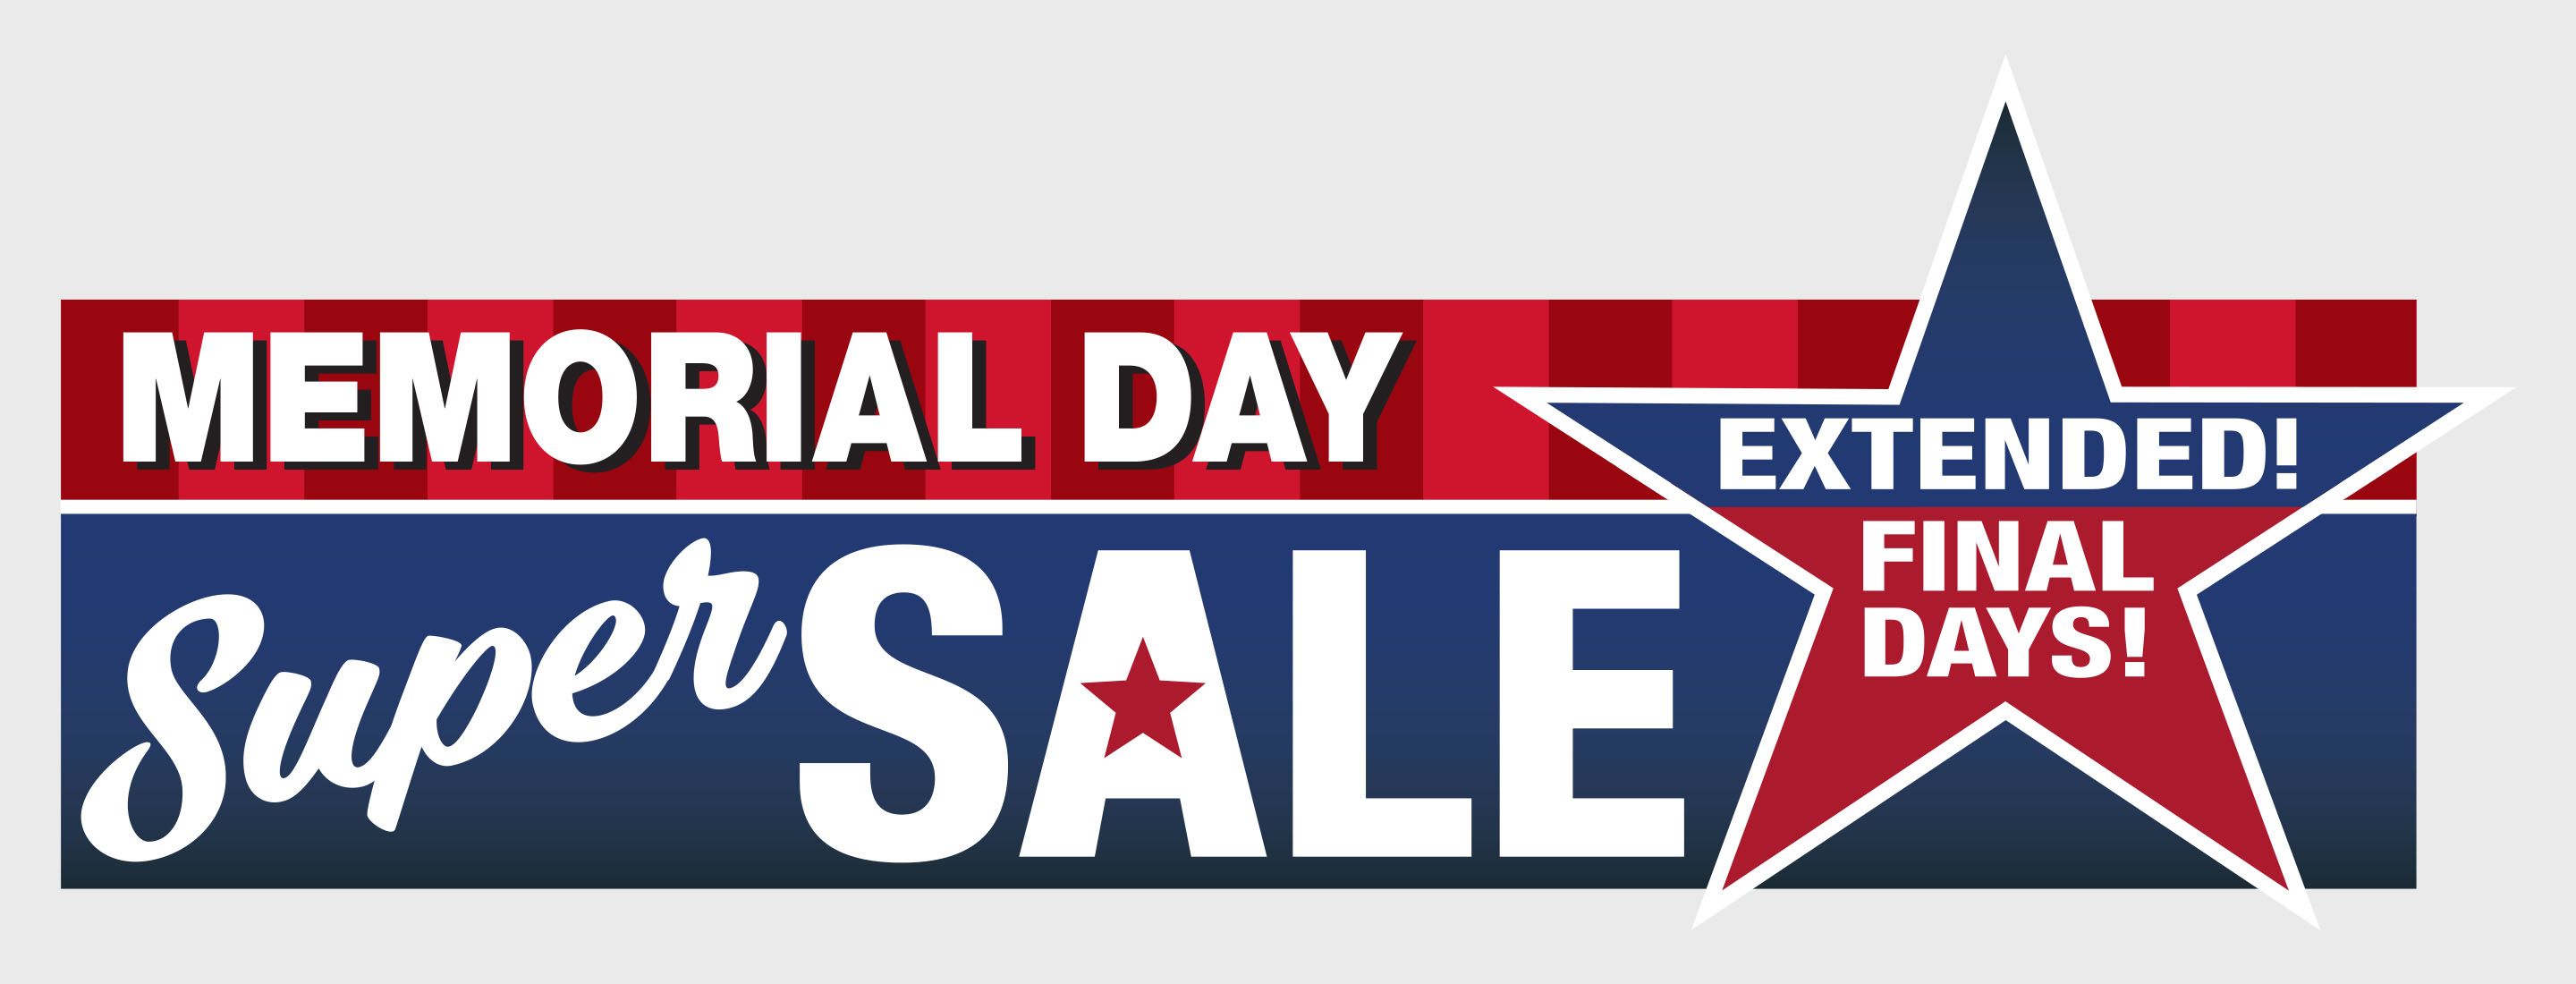 Extended Memorial Day Super Sale